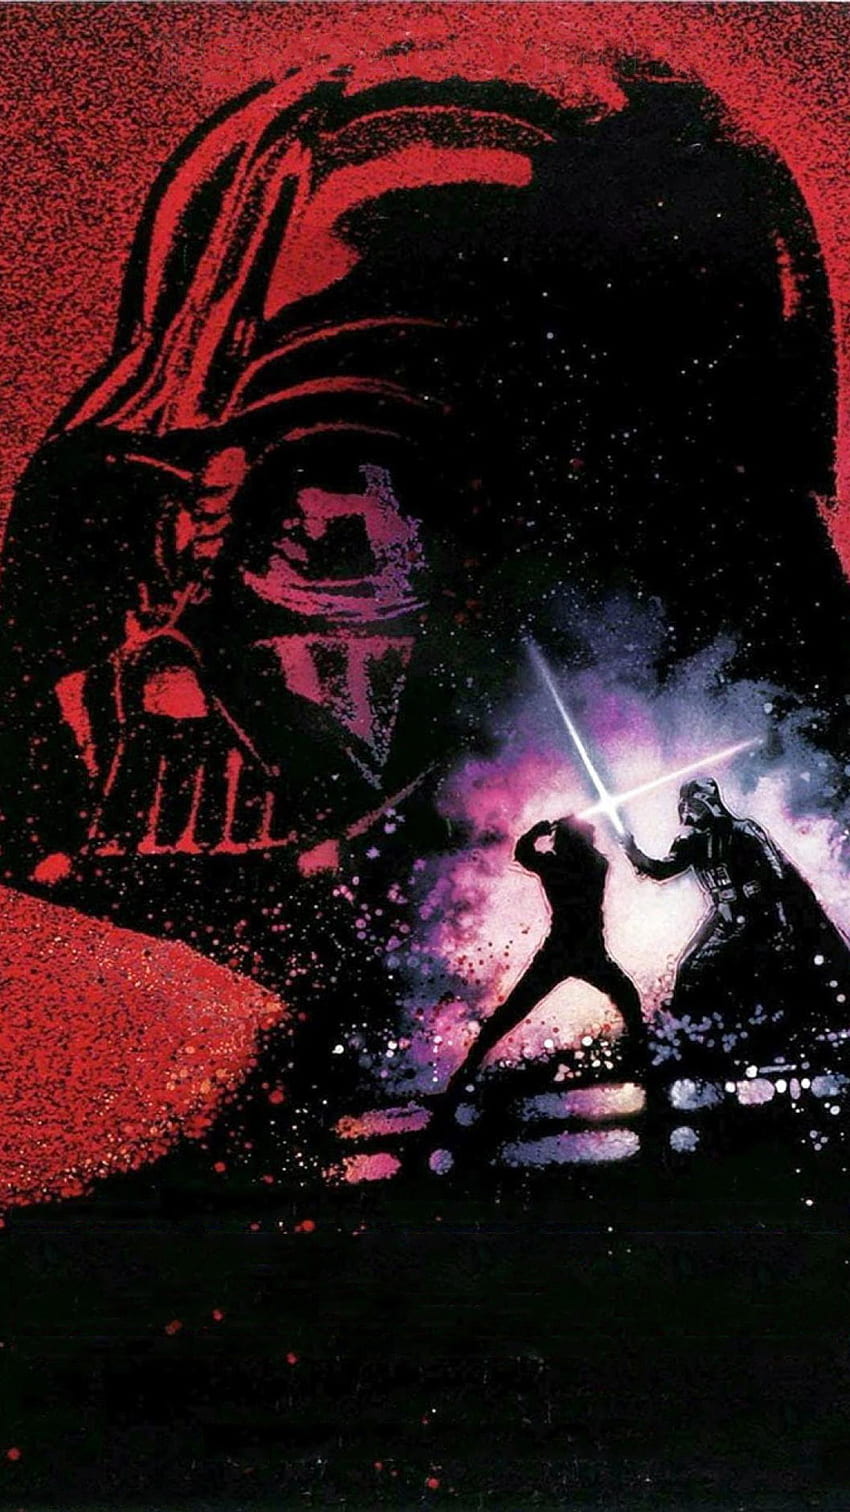 I love this as a phone but I hate that Vader's lightsaber looks blue and Luke's looks red. Could anyone change Luke's lightsaber to green and Vader's lightsaber to red? Thank HD phone wallpaper